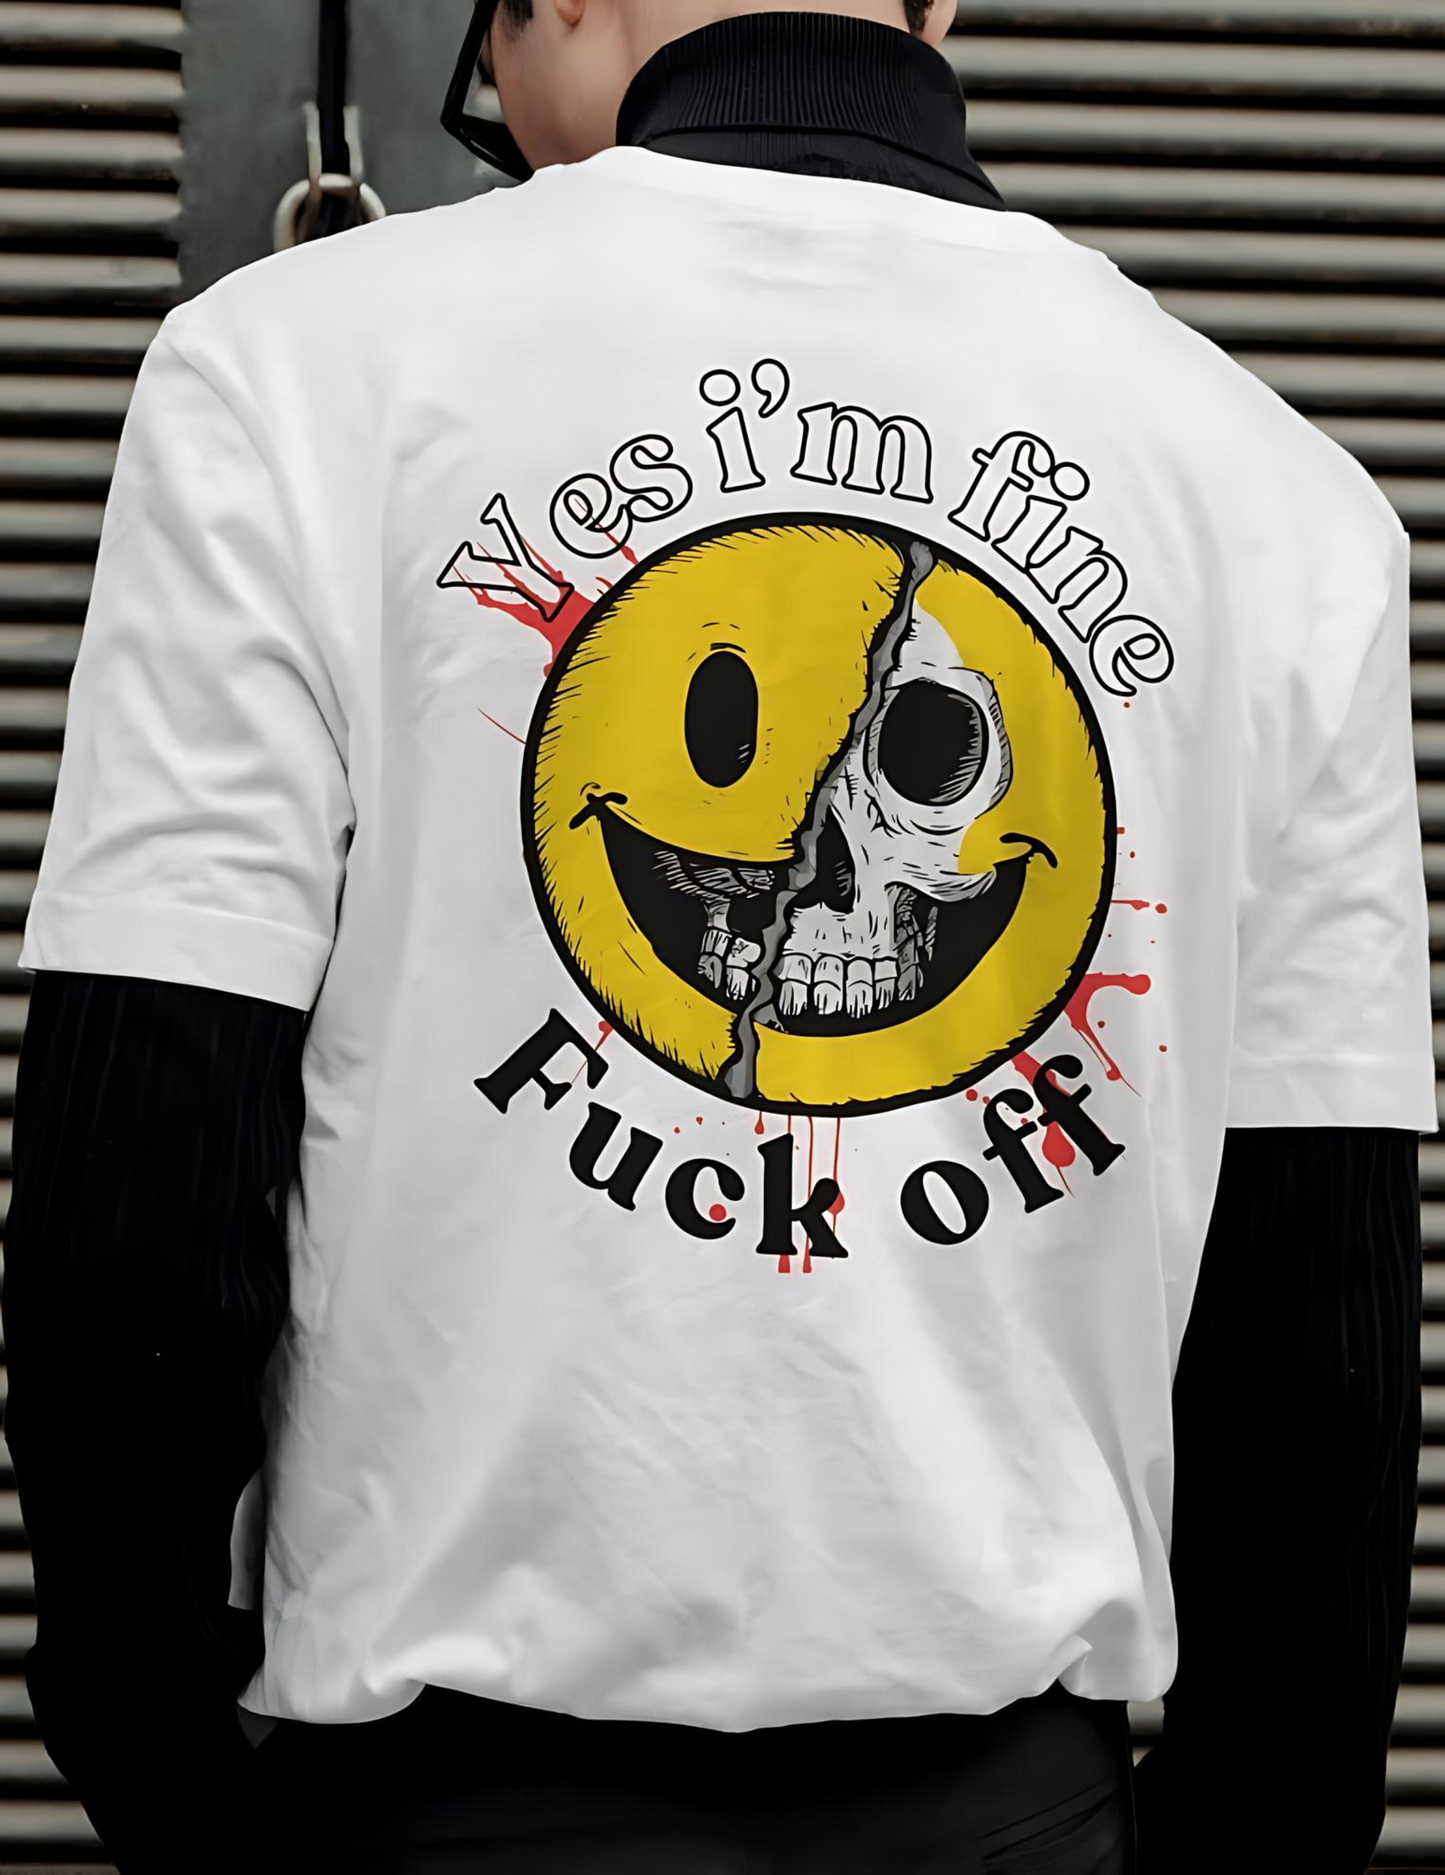 White T-shirt with a half smiley, half skull design and bold text 'Yes I'm Fine' and 'Fuck Off' 